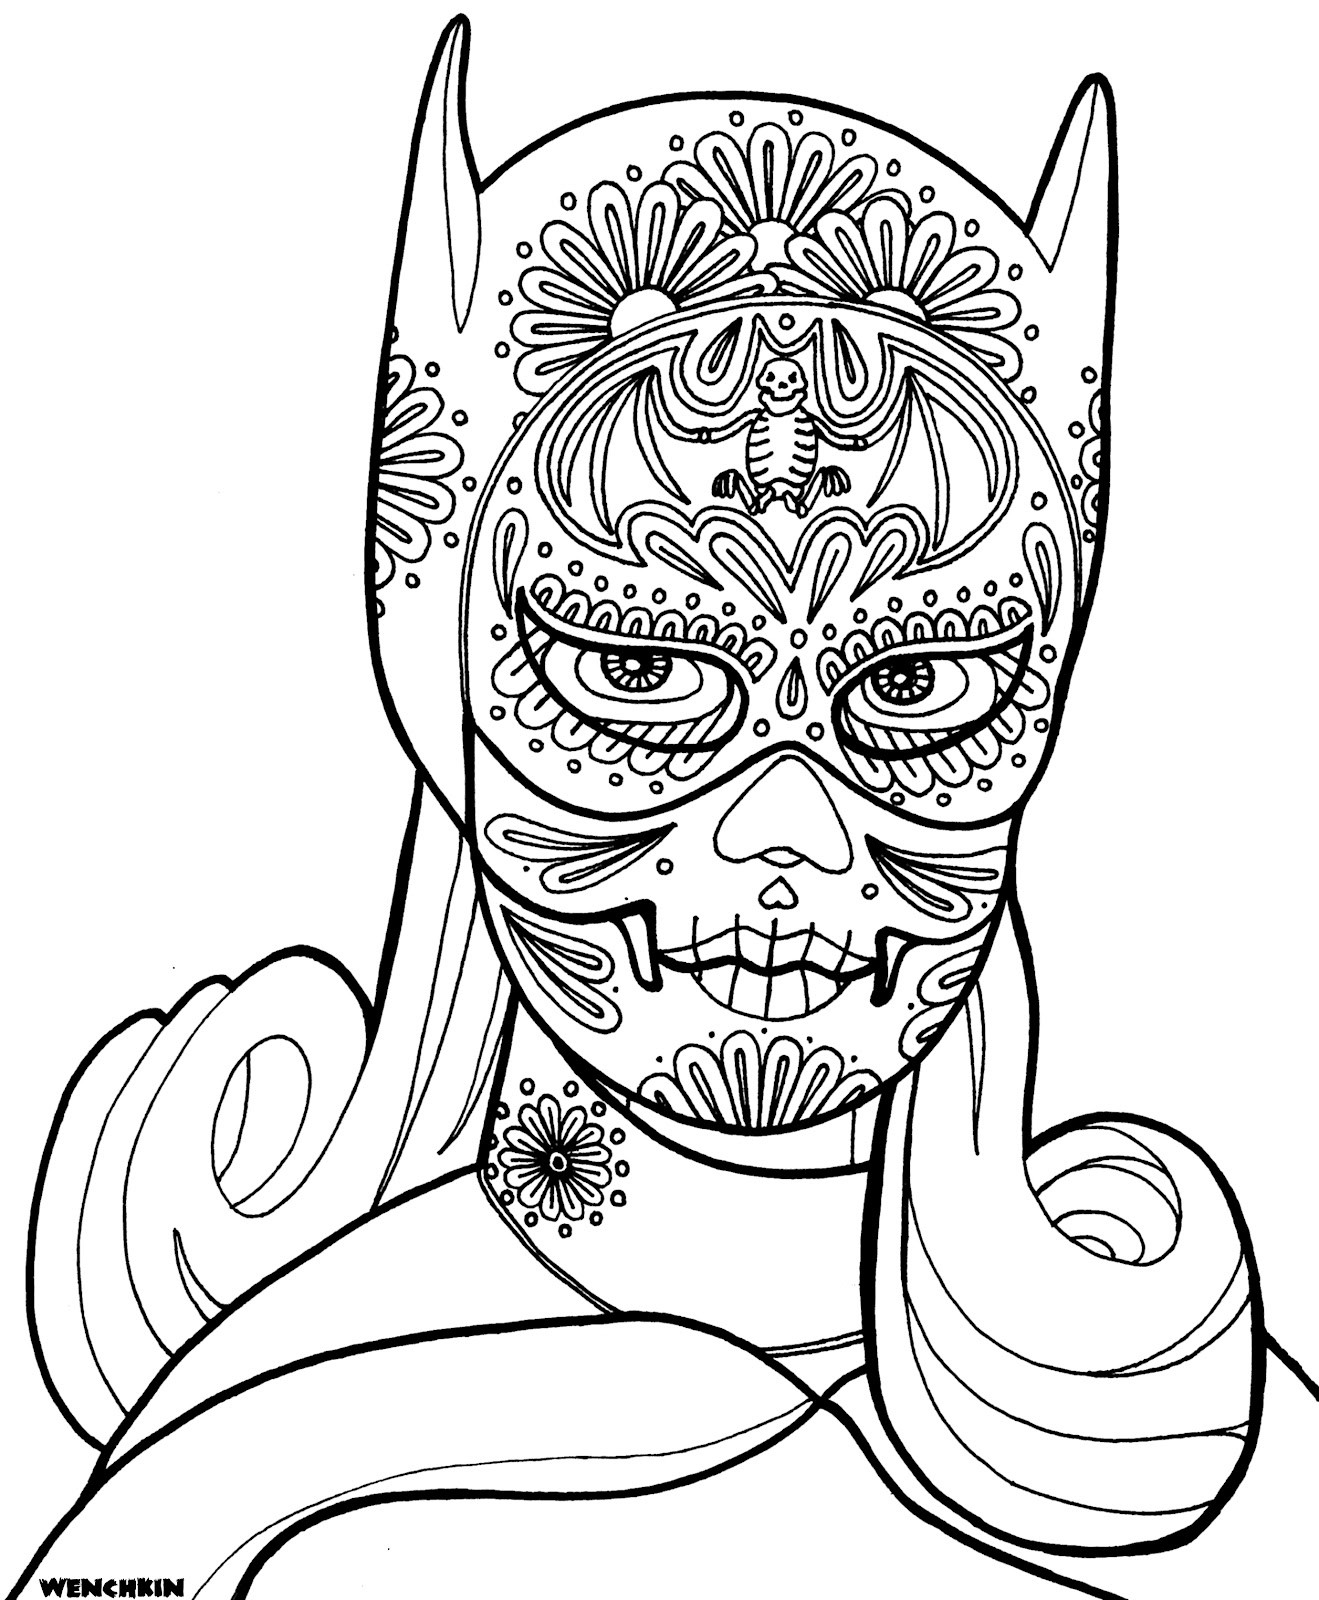 Girly Adult Coloring Book Pages
 Yucca Flats N M Wenchkin s coloring pages Dia de los